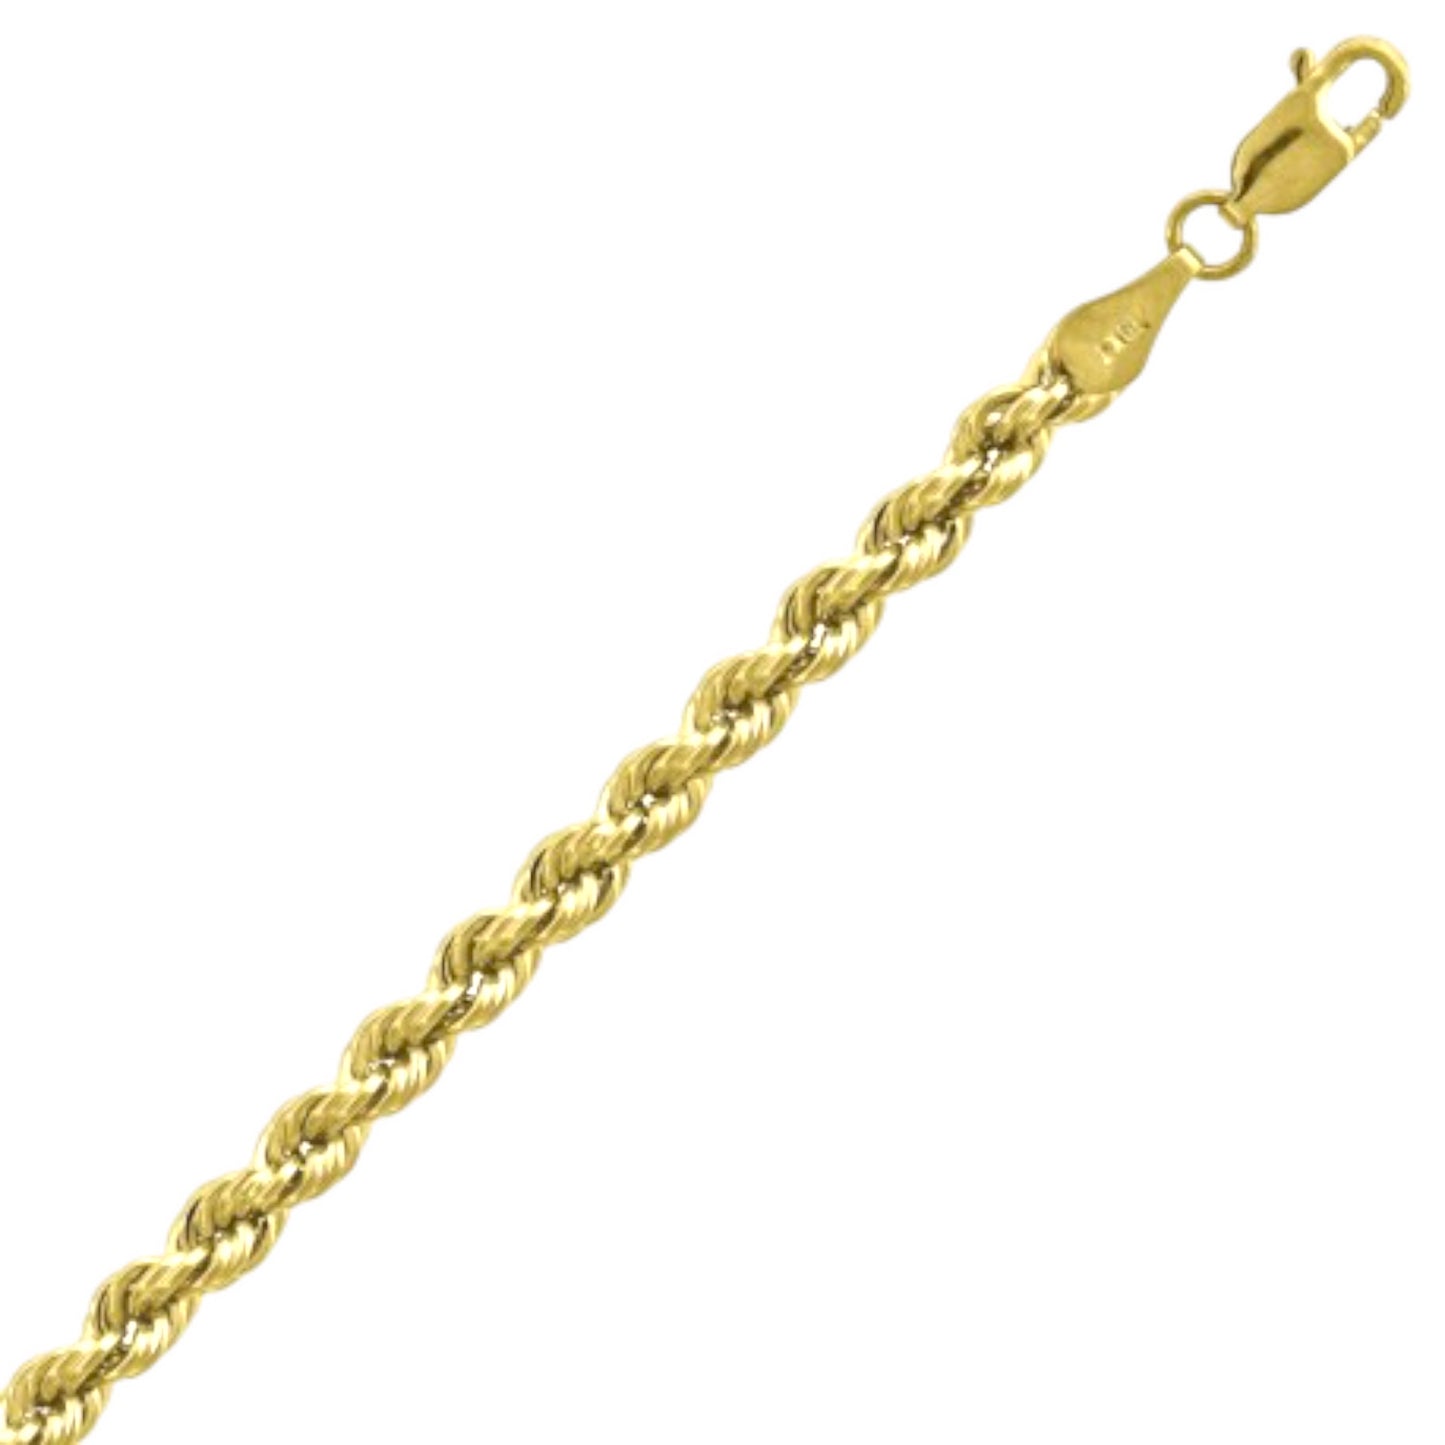 4mm Semi Solid 10k Gold Rope Chain